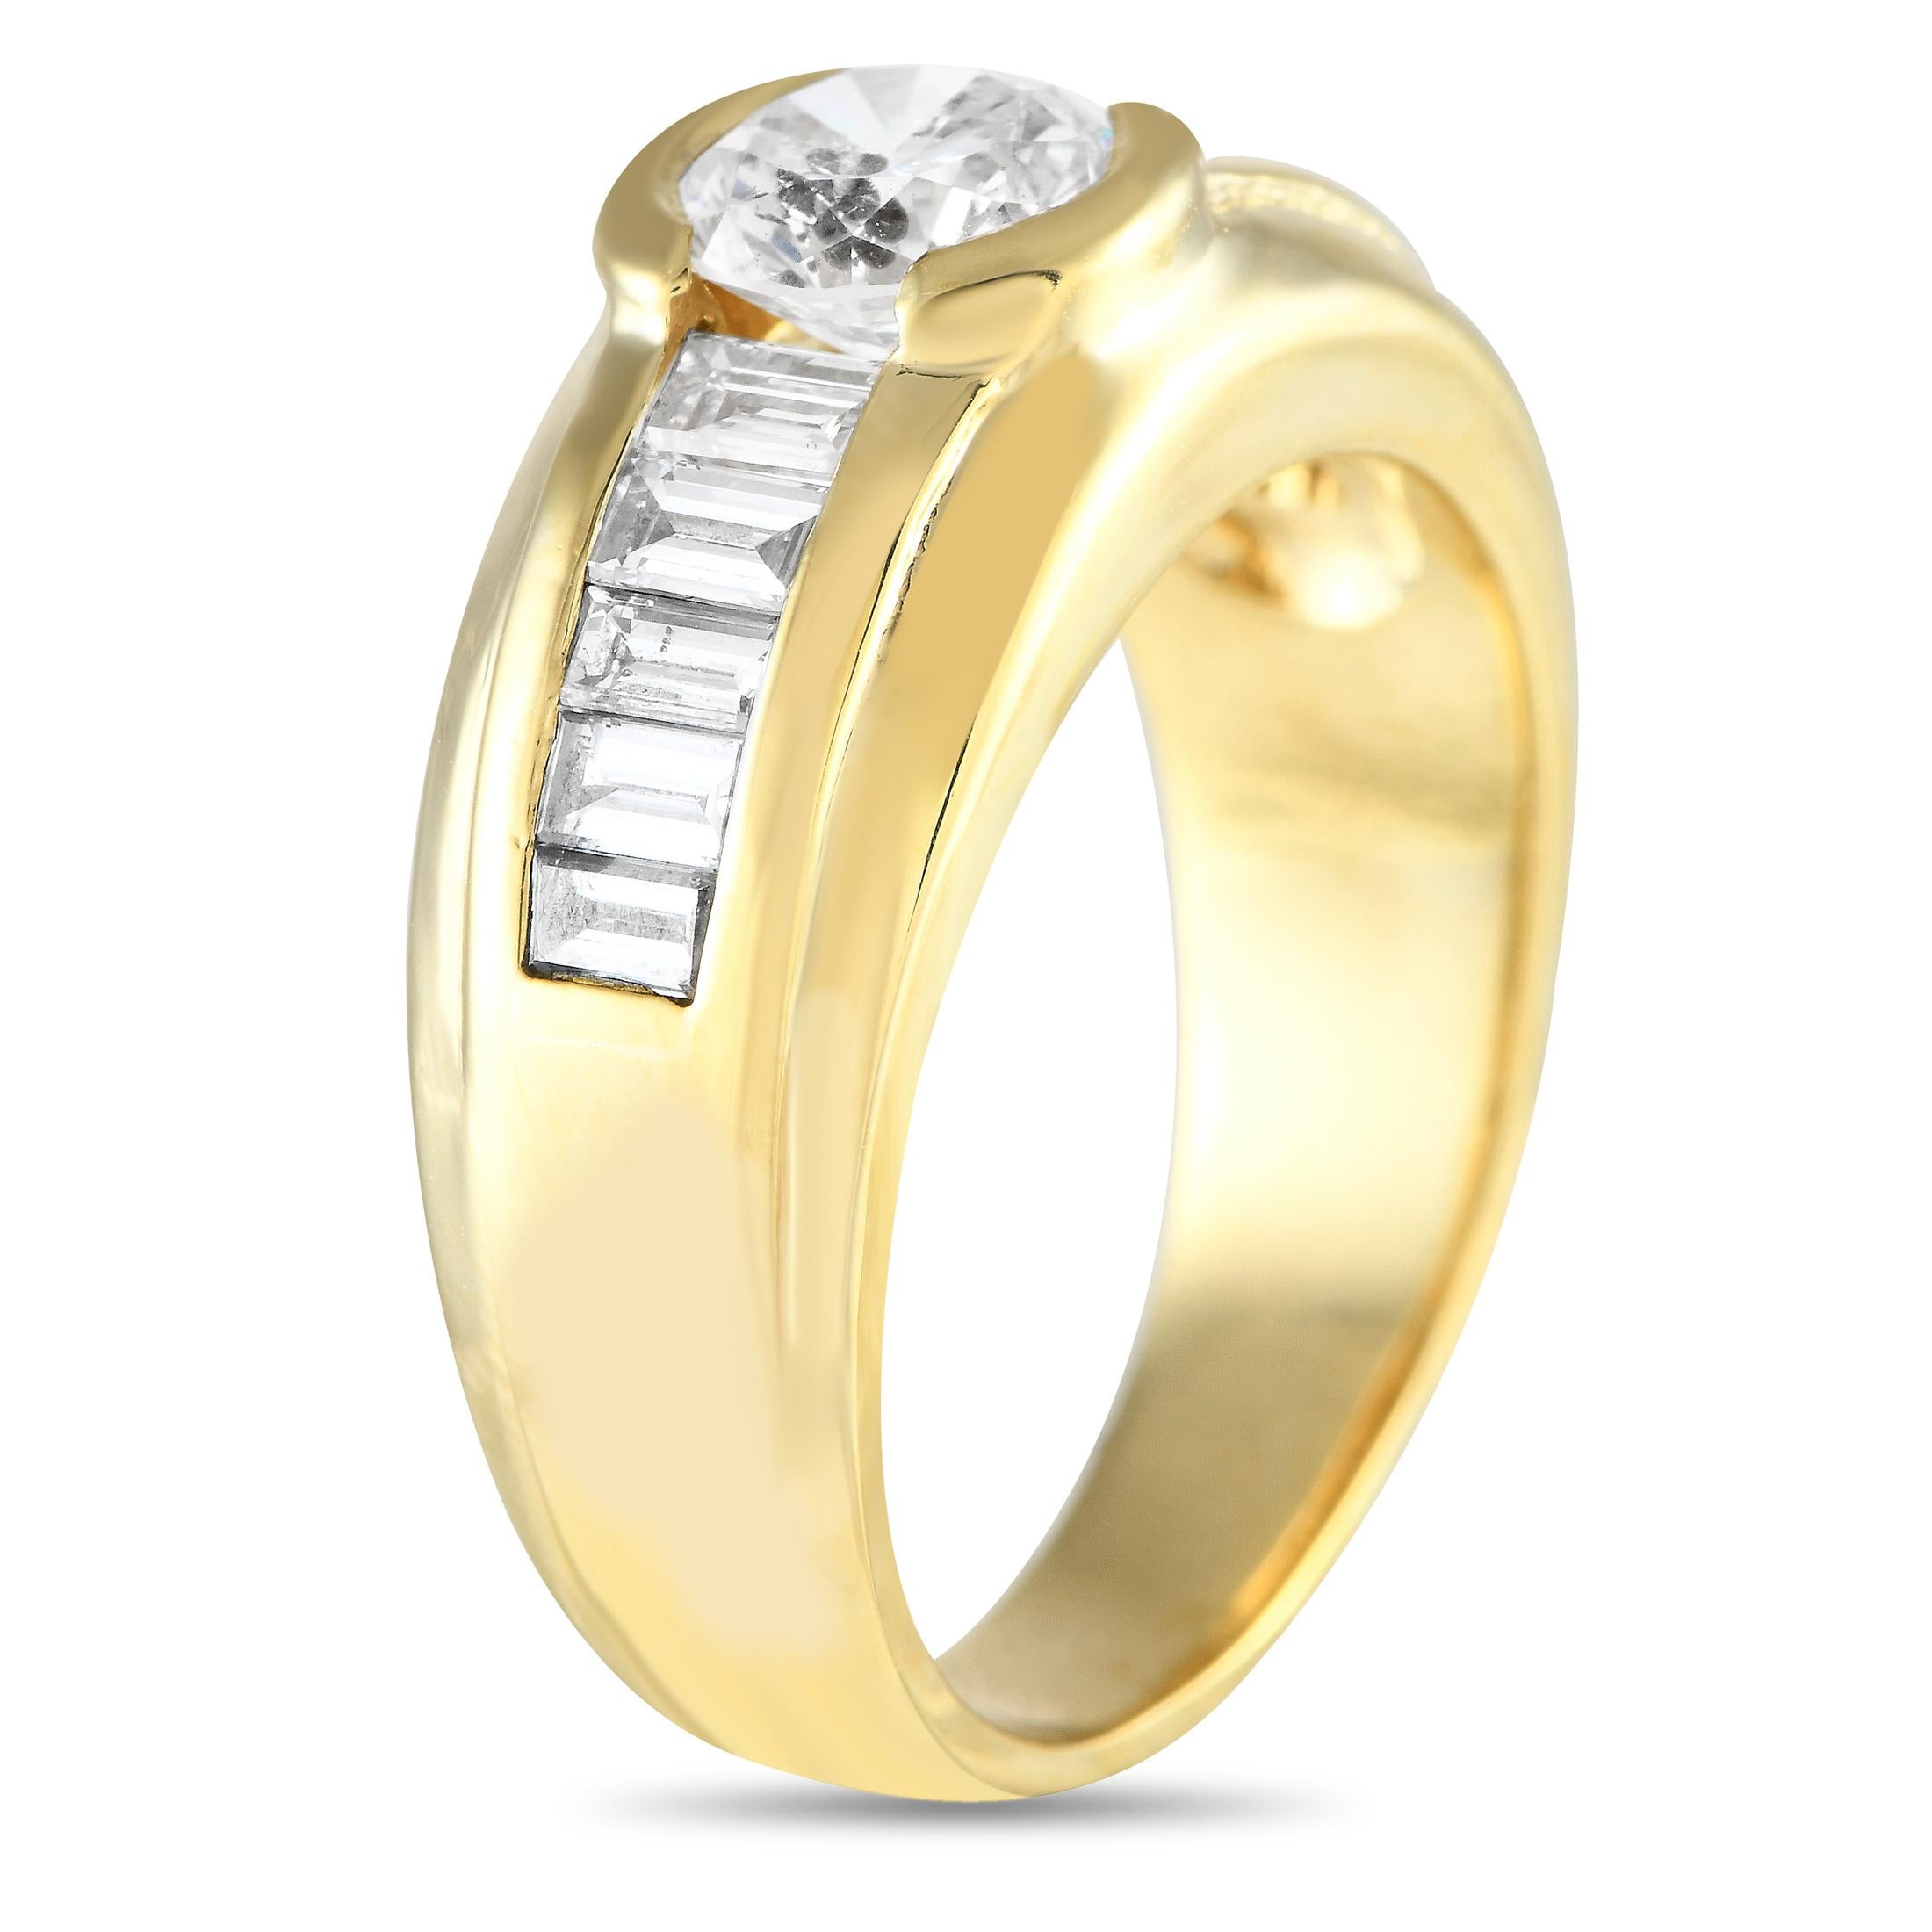 Designed with equal parts purpose and beauty, you'll love this 18K yellow gold ring's geometric elegance and secure setting. It features a wide band measuring 6mm thick, with a top height of 7mm. A striking 1 carat round diamond on a half bezel sits